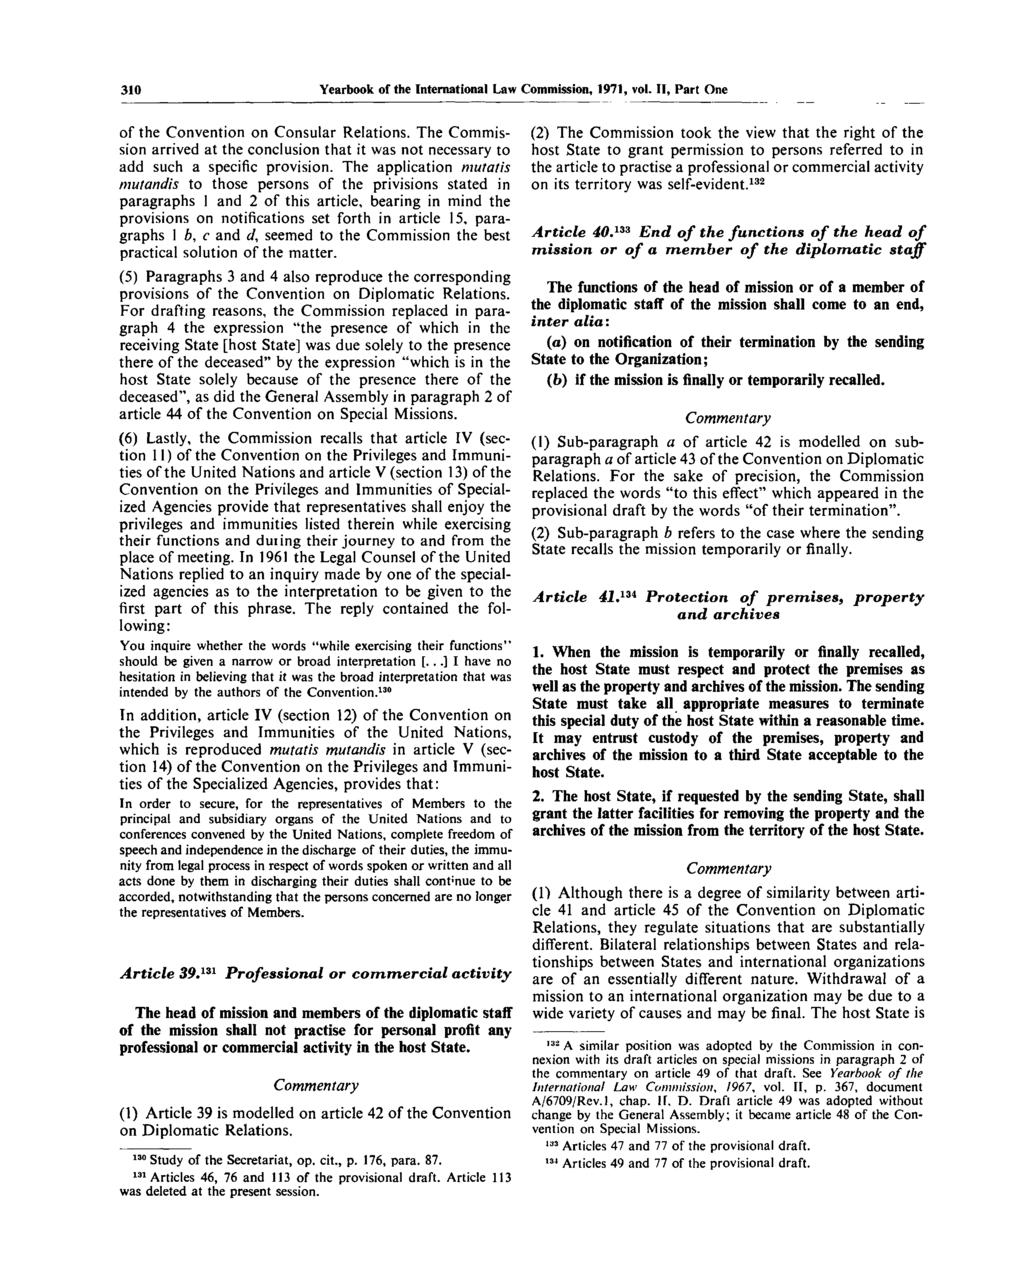 310 Yearbook of the International Law Commission, 1971, vol. IT, Part One of the Convention on Consular Relations.